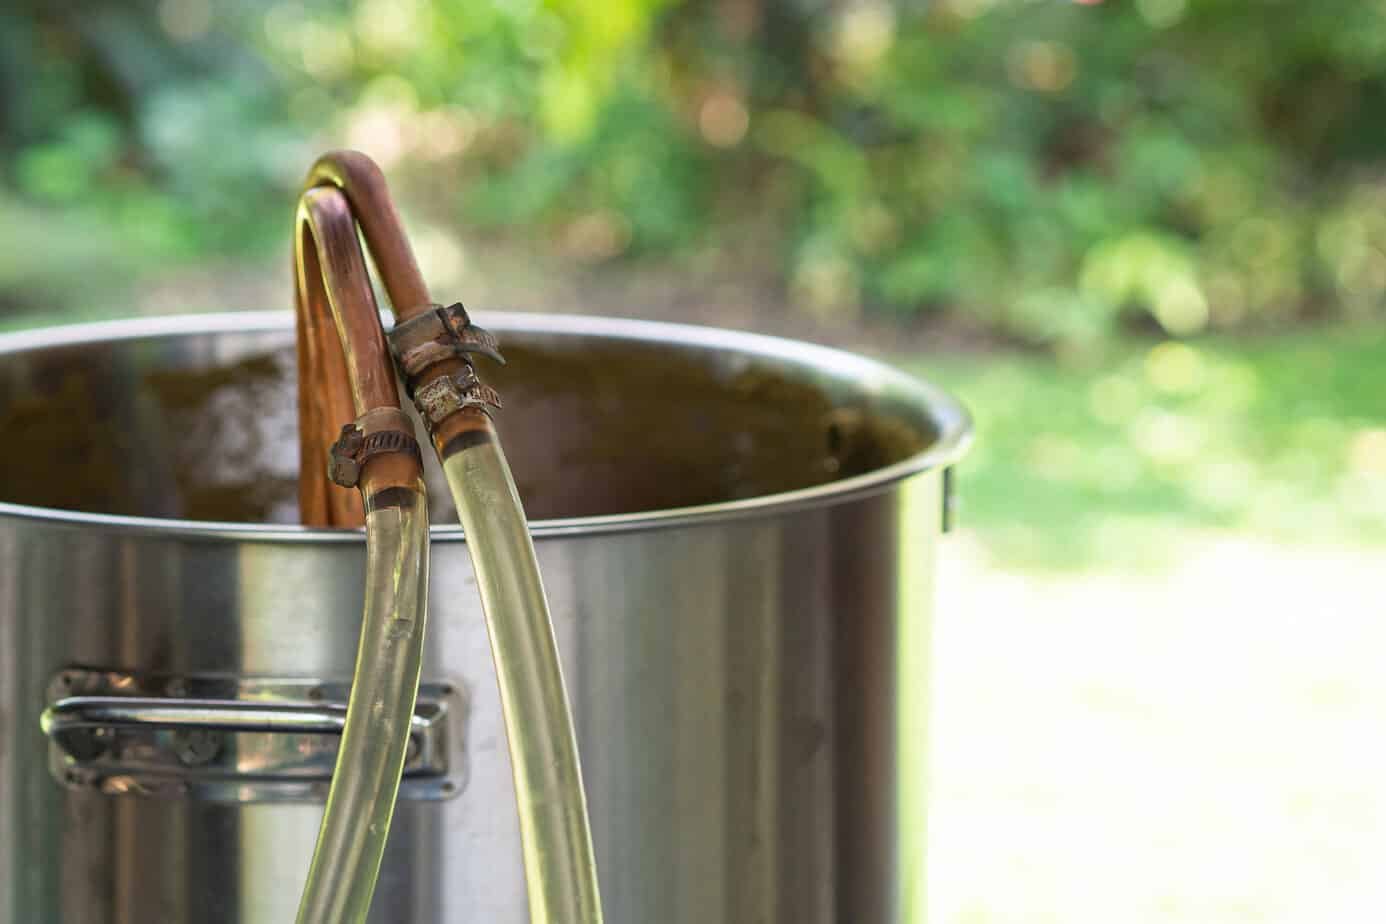 home brewing laws in the united states